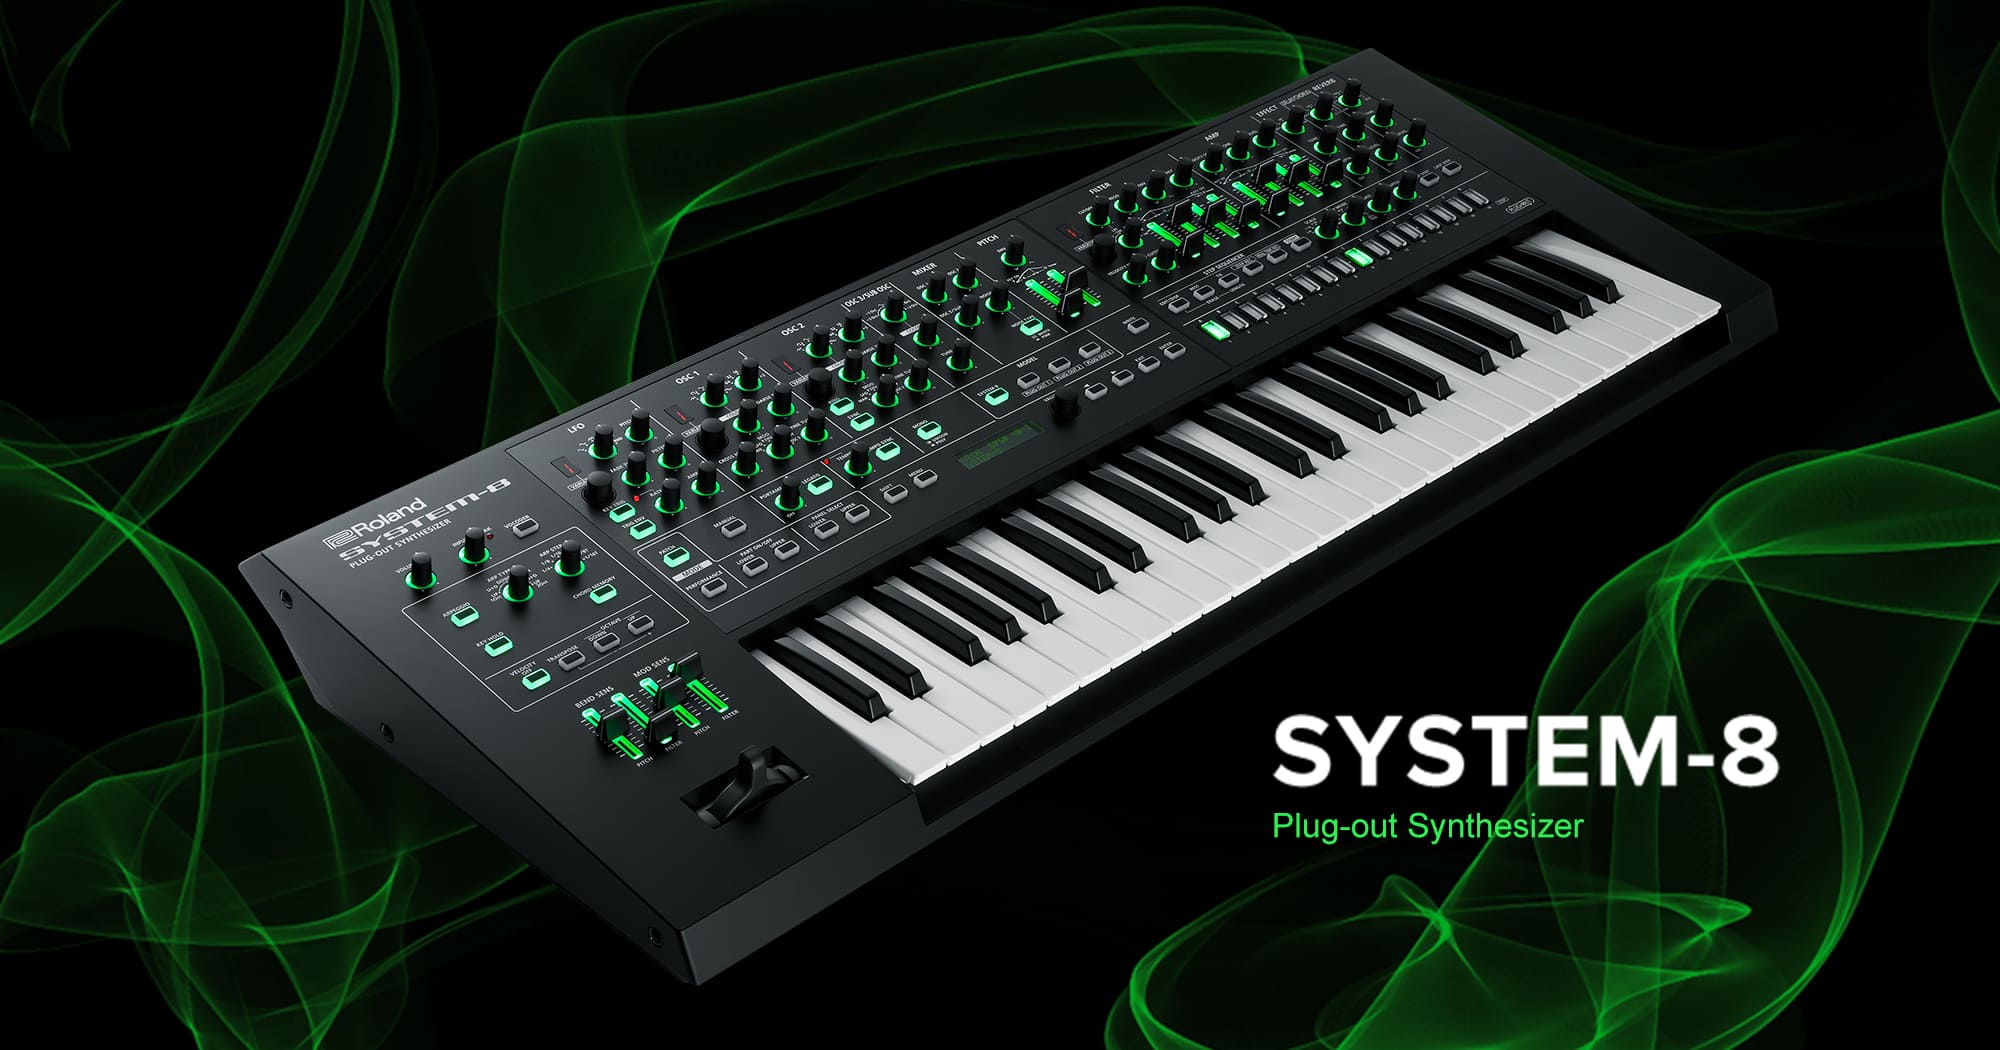 SYSTEM-8 Plug-out Synthesizer